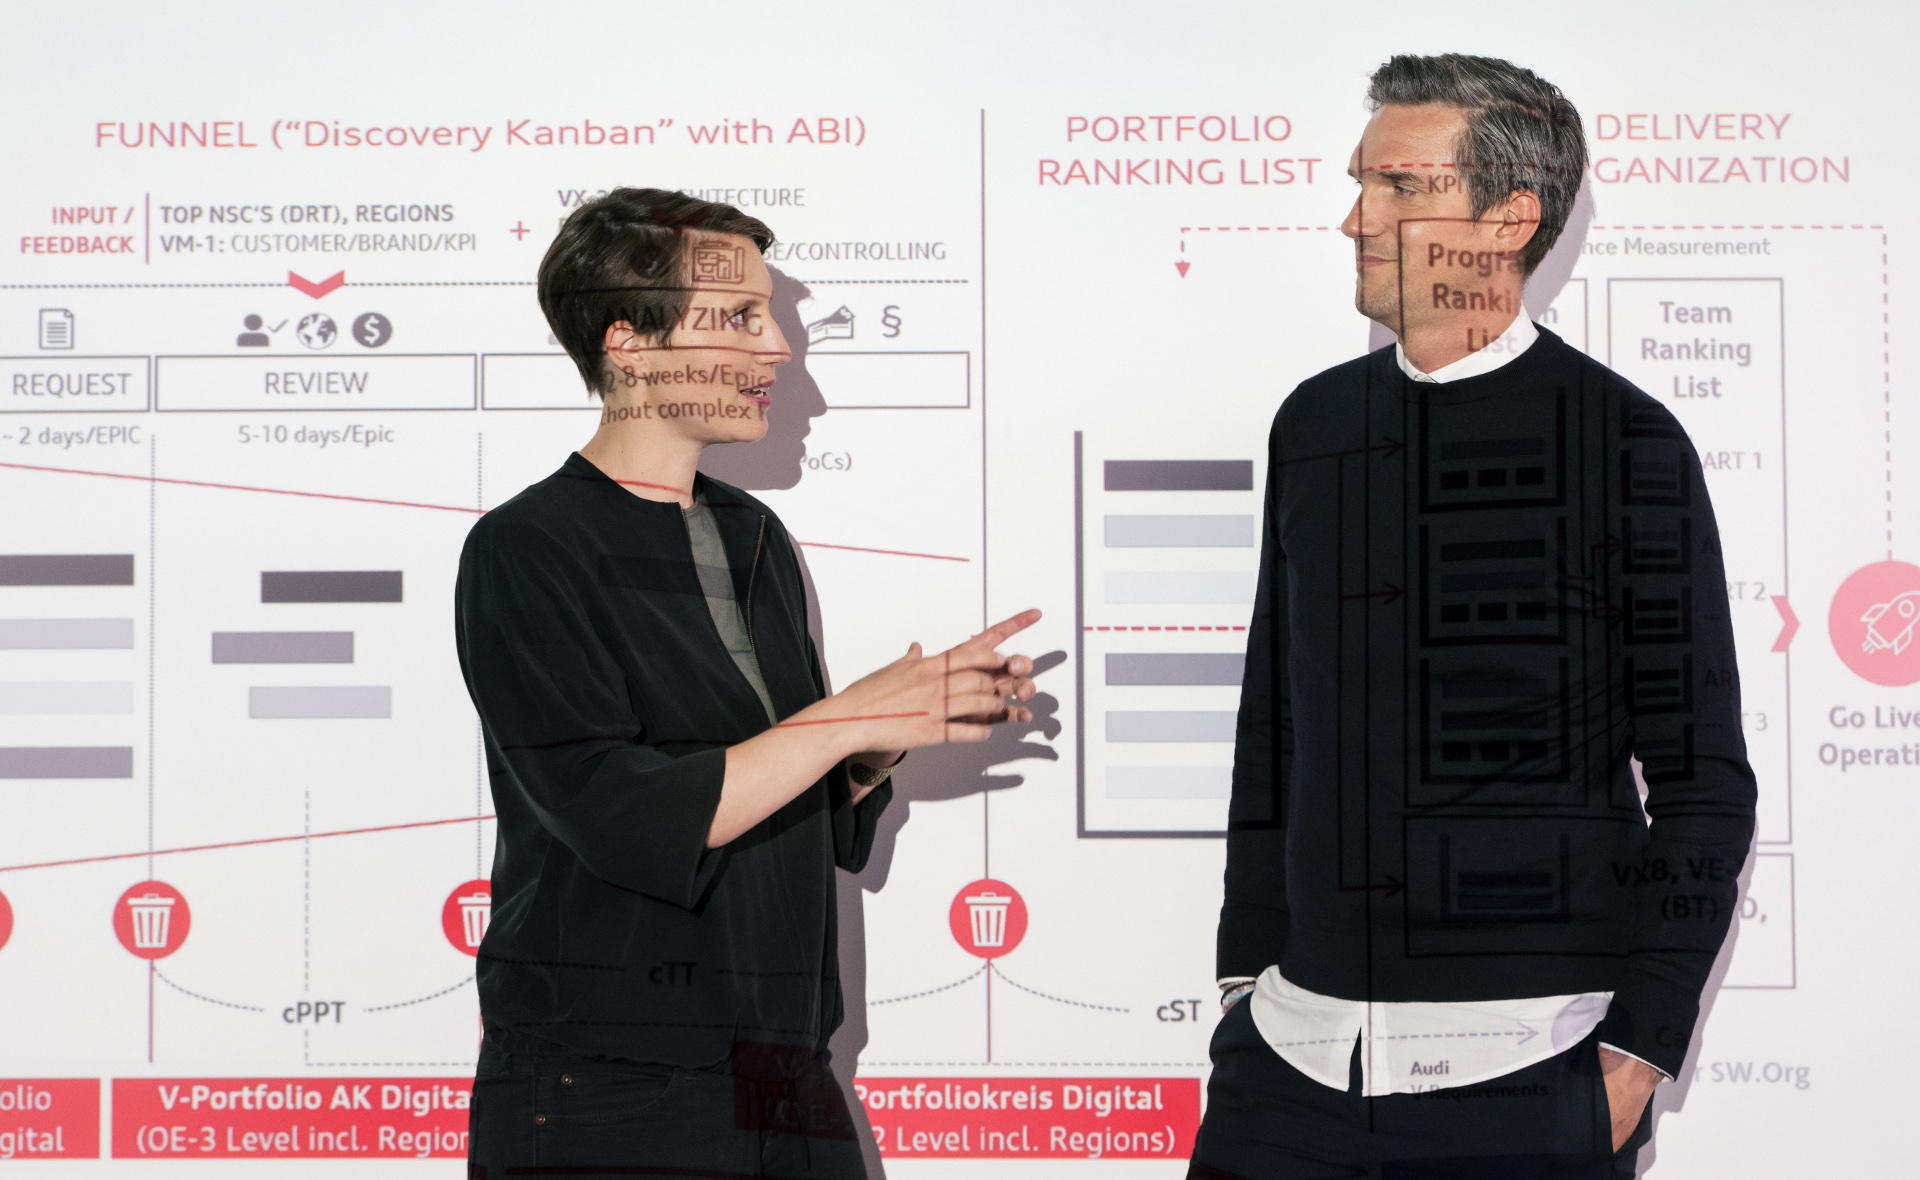 Annegret Maier and Boris Meiners stand talking in front of a large screen.